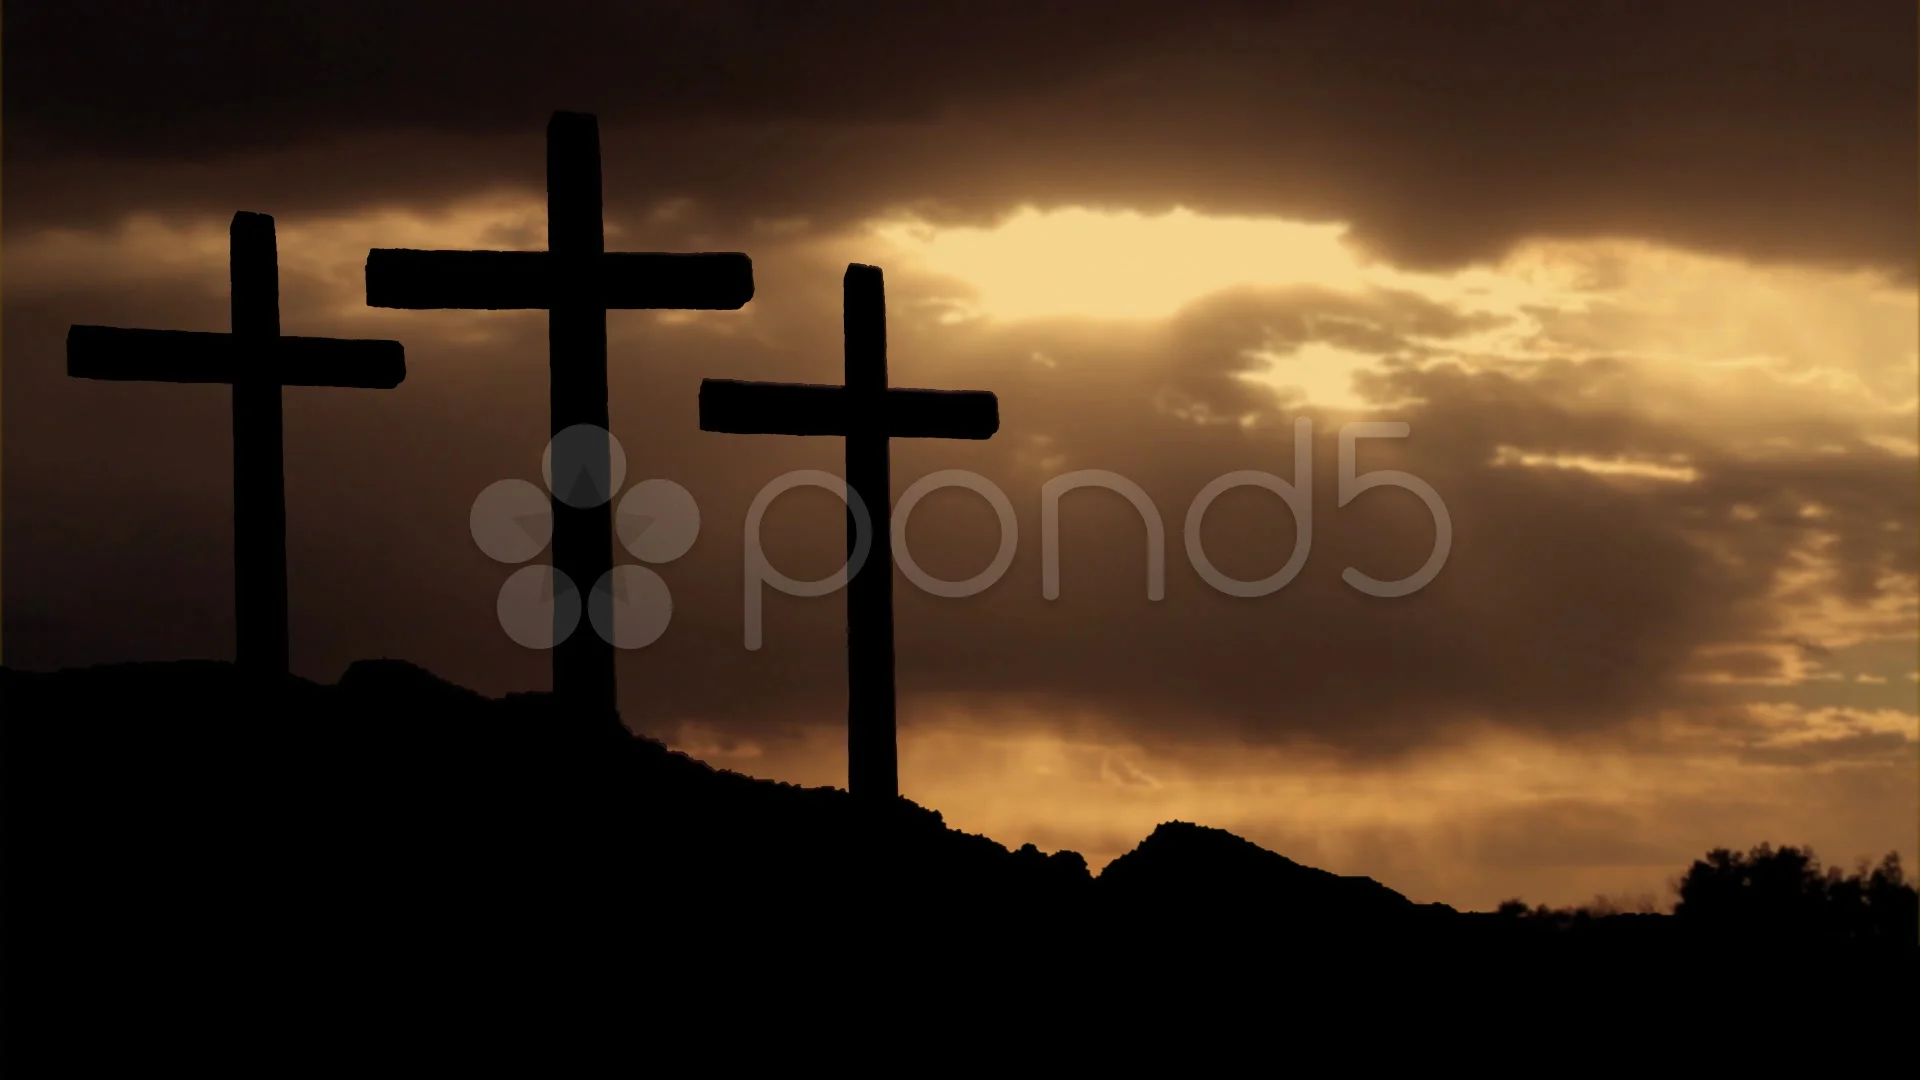 The three crosses on Calvary: What do they signify?